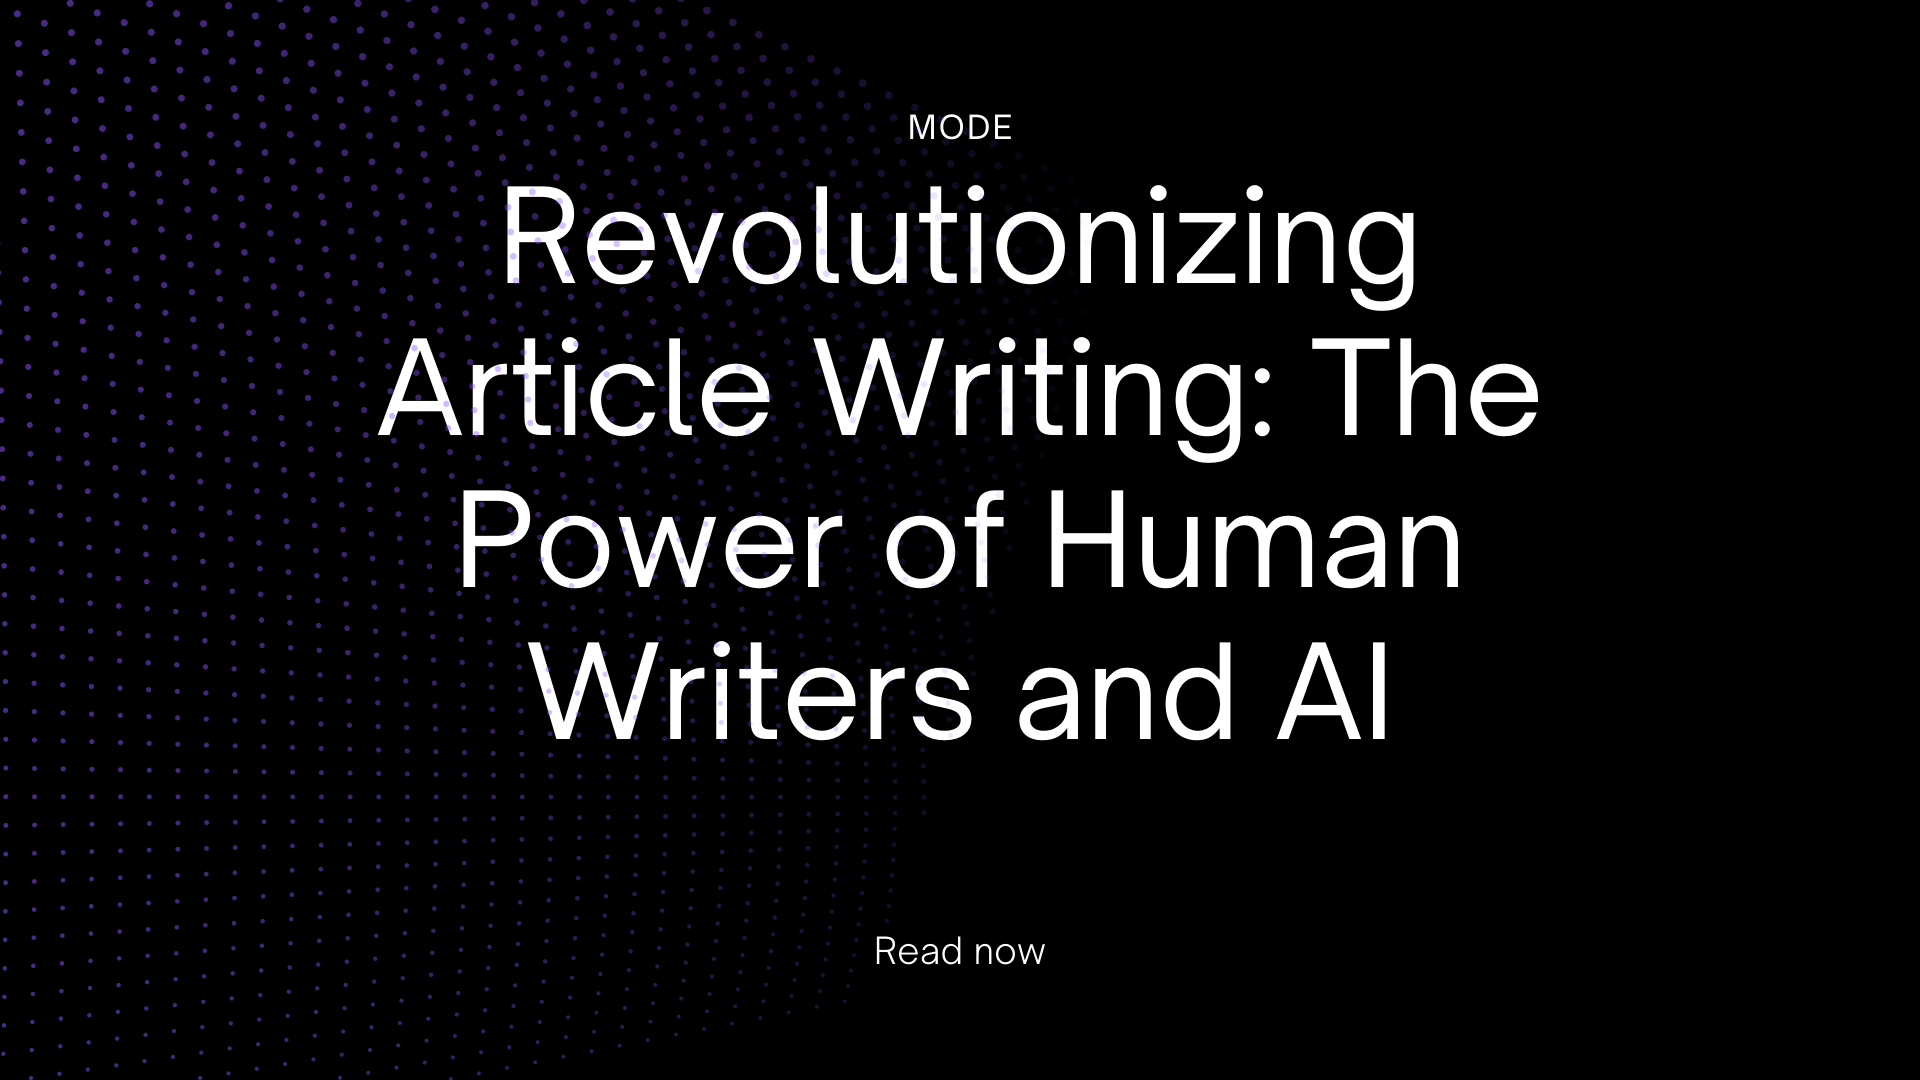 Revolutionizing Article Writing: The Power of Human Writers and AI